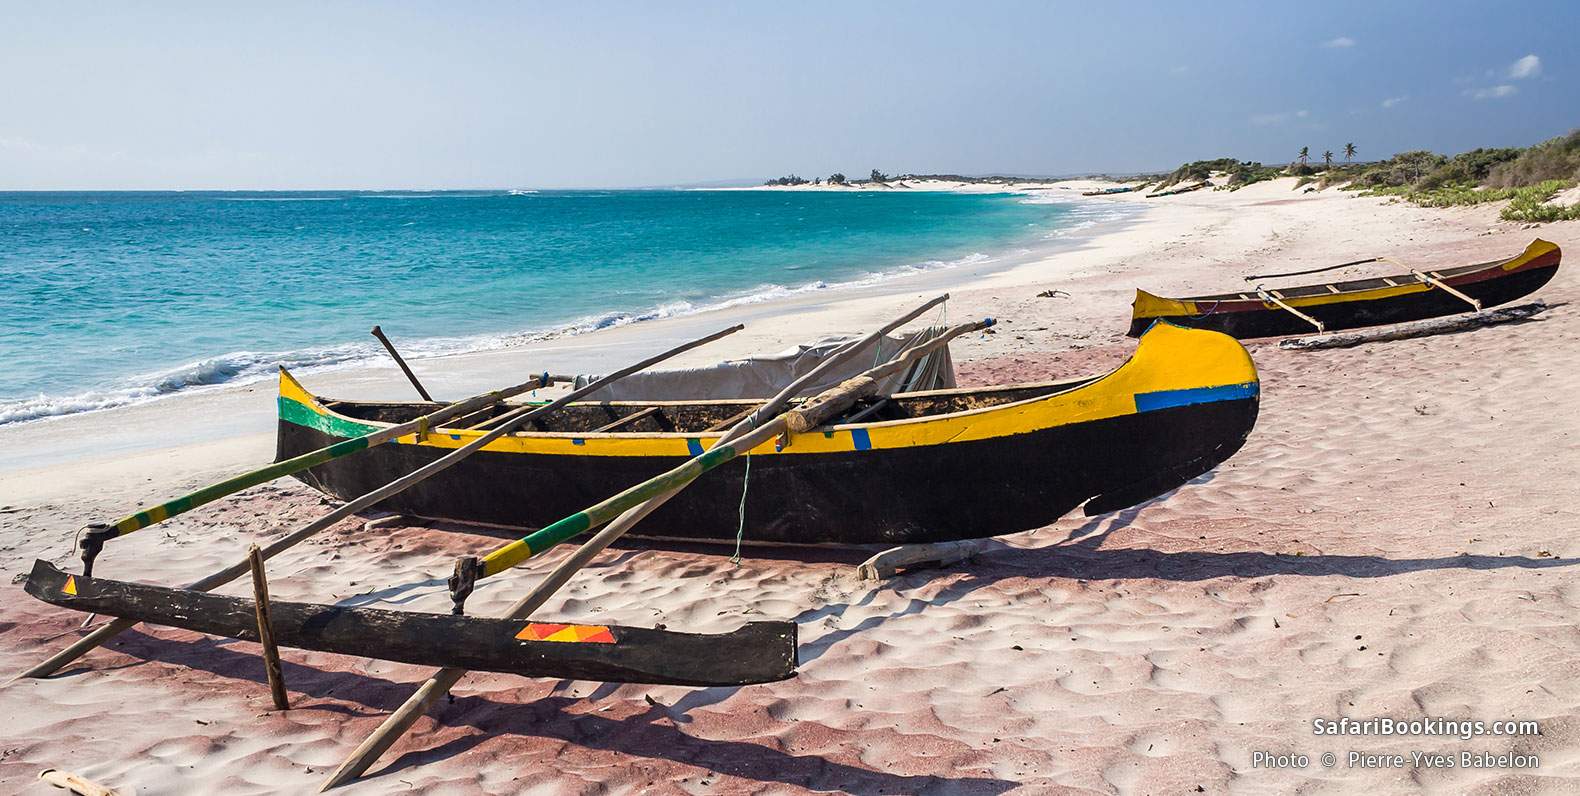 Fishing canoes on the beach of Itampolo, southern Madagascar